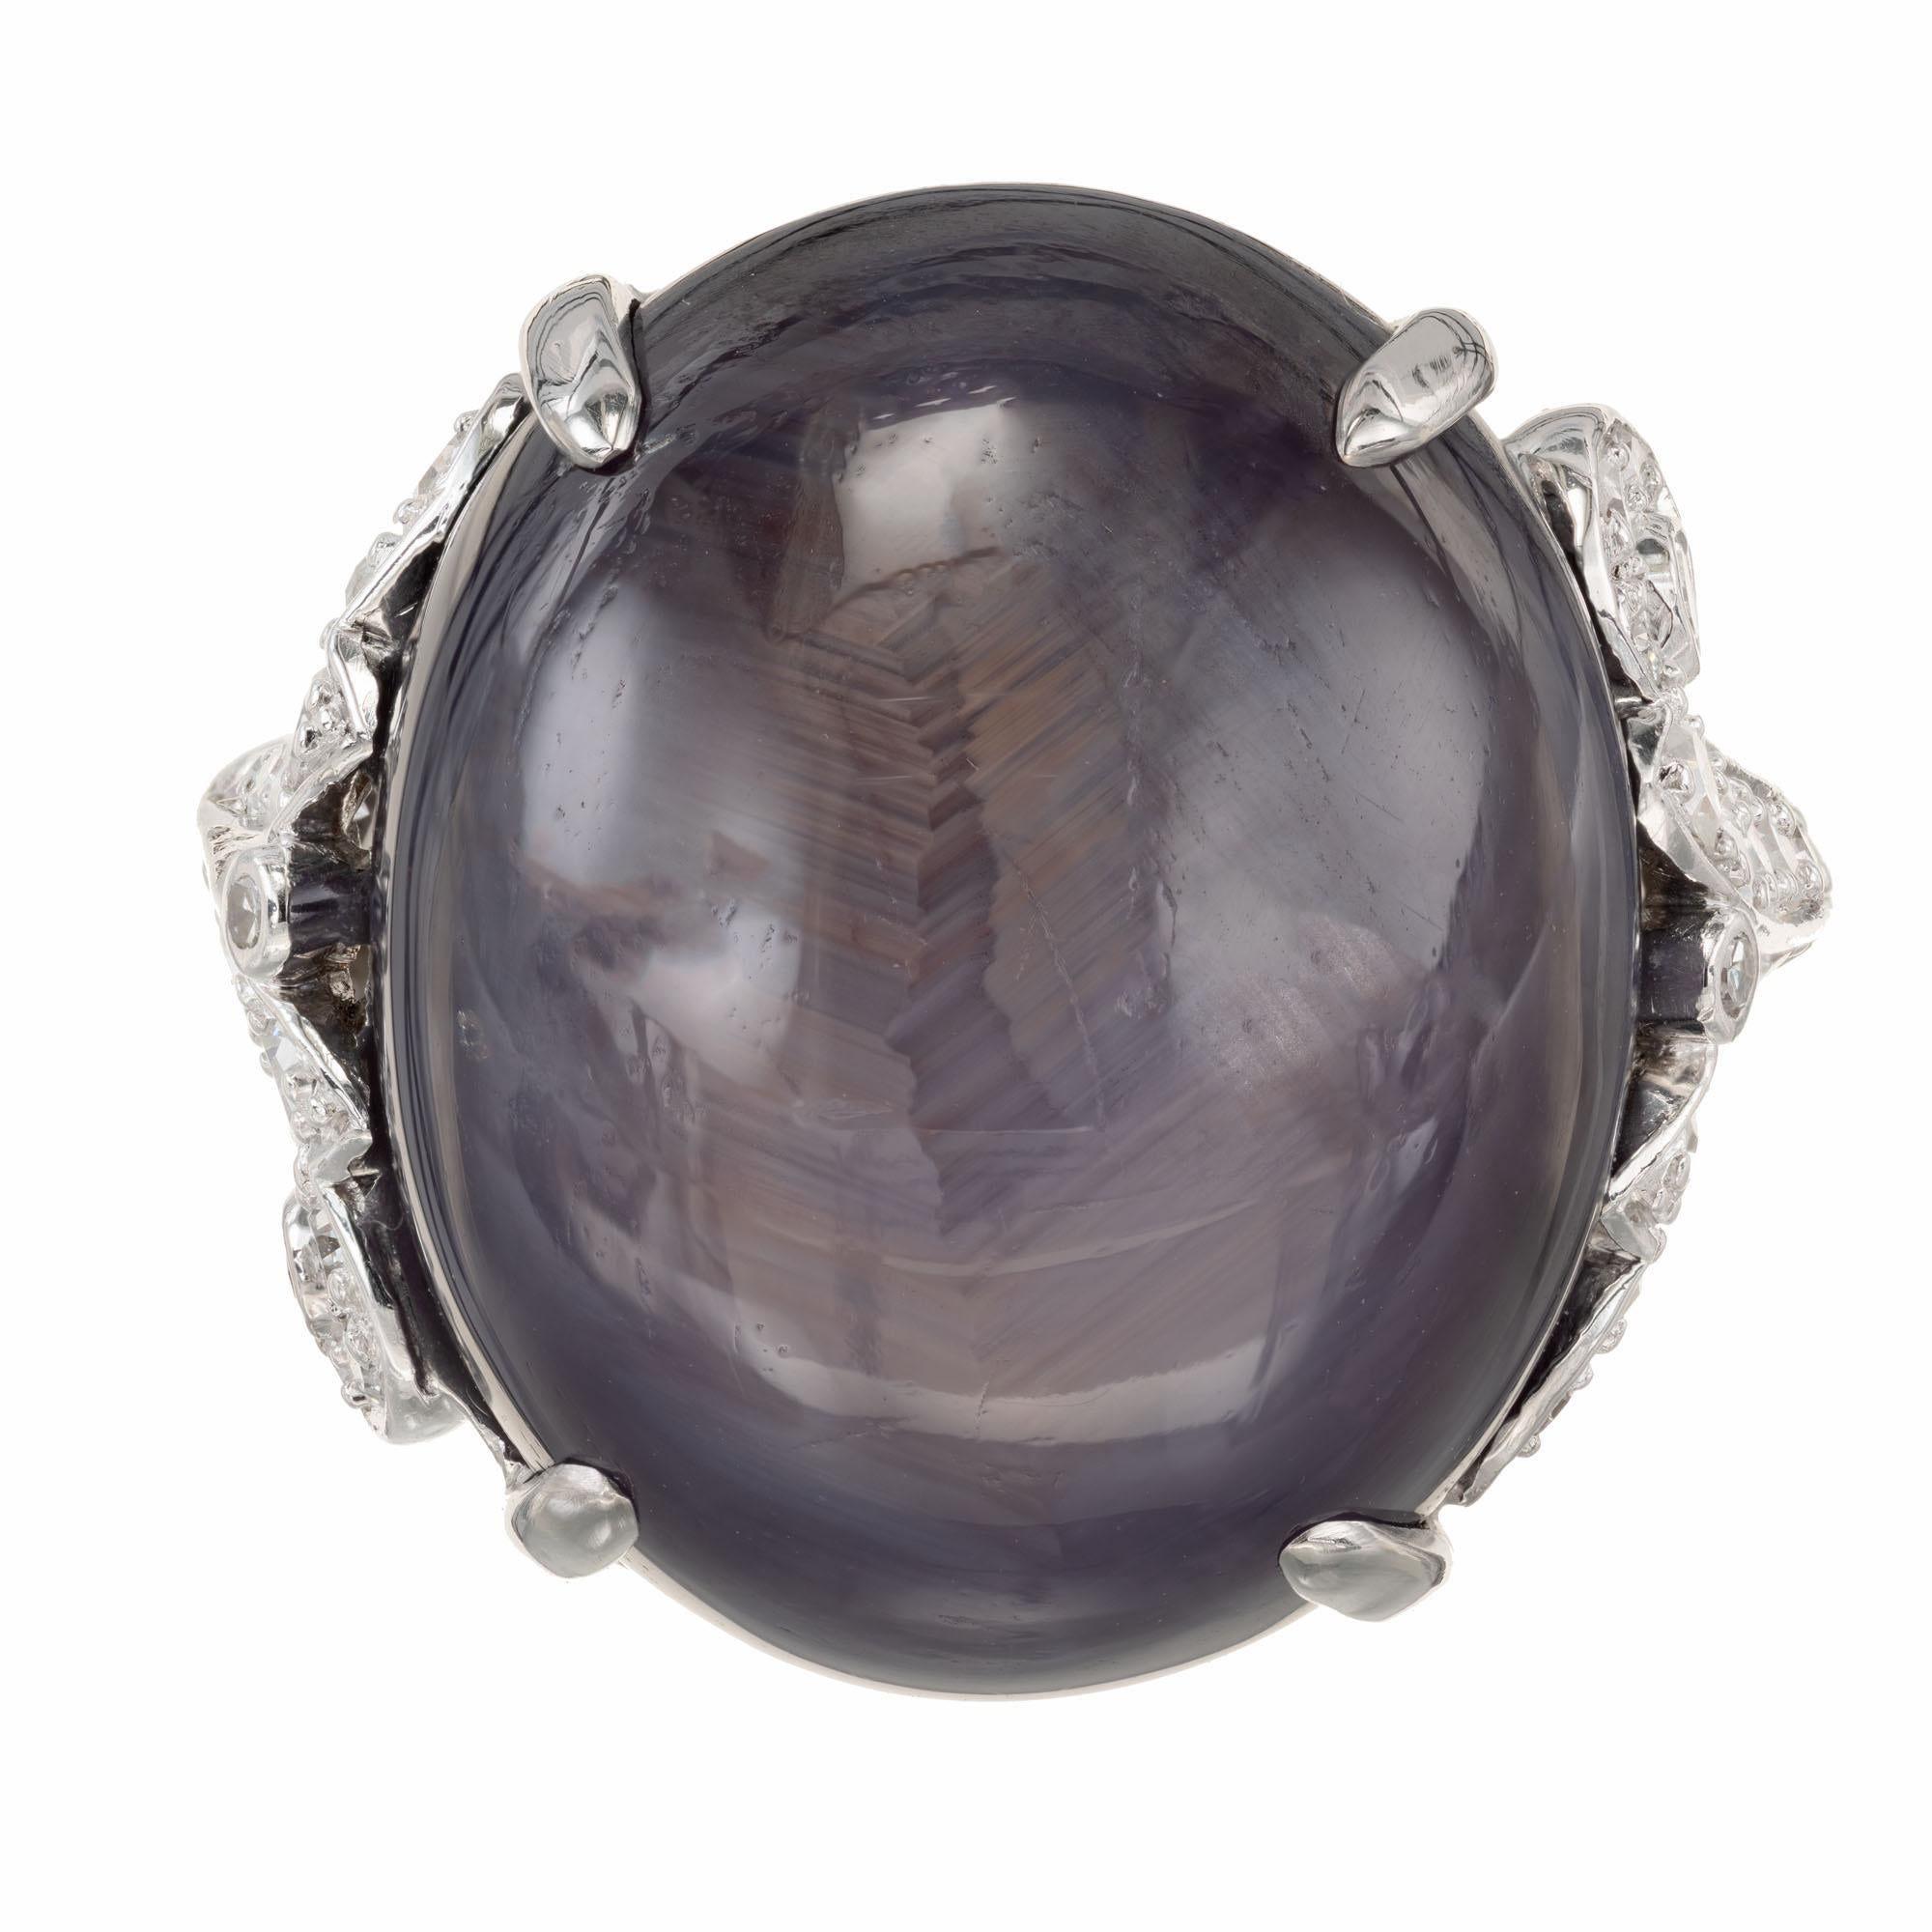 Vintage purple natural 30.37 carat oval star sapphire and diamond engagement ring. GIA certified platinum setting with a star sapphire cabochon center stone, accented with 40 single cut diamonds. Minor natural surface abrasions. 

1 oval cabochon